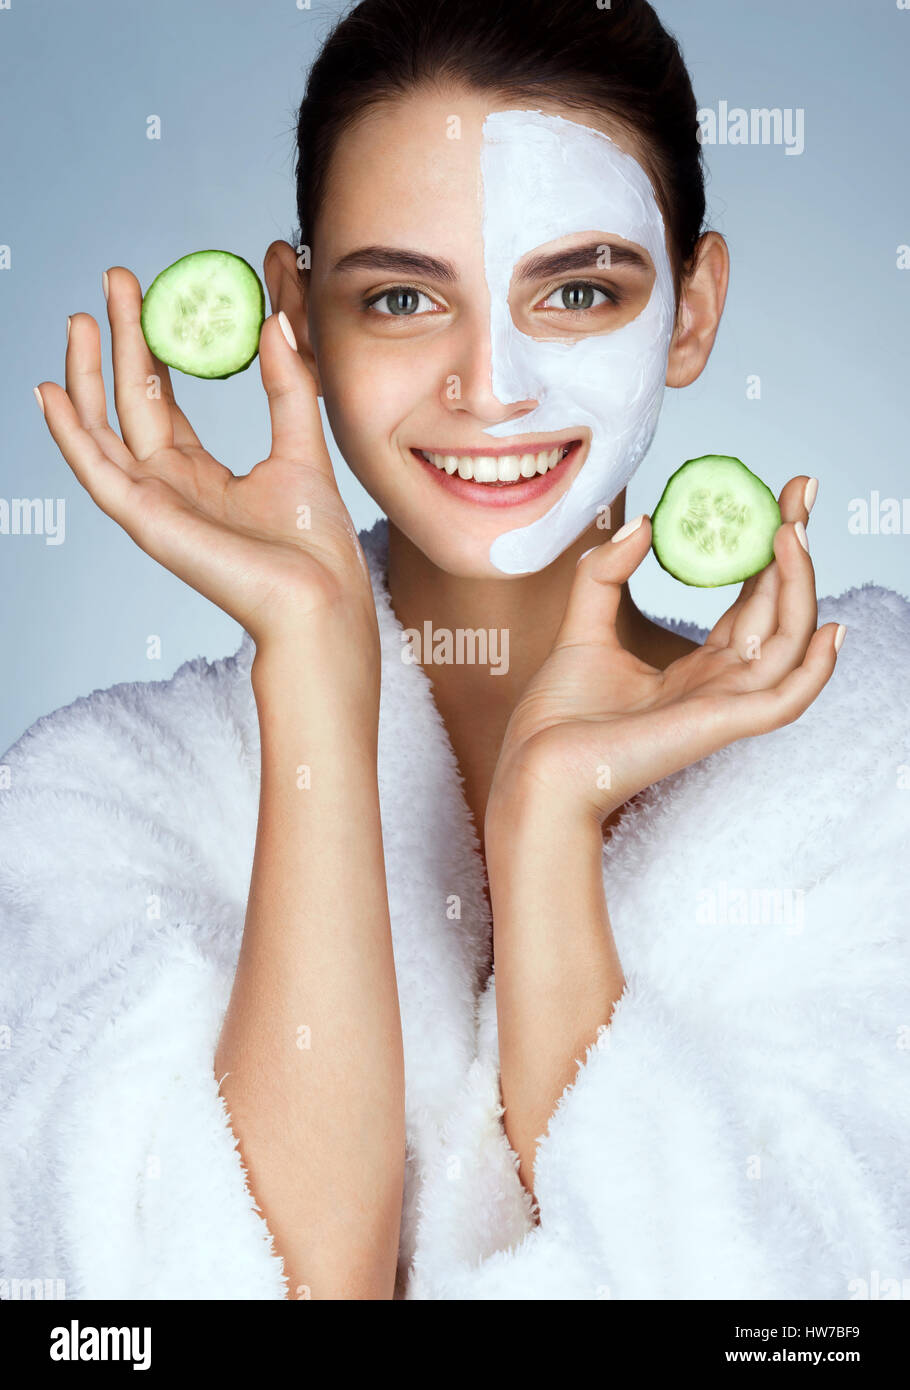 Laughing beautiful model with the slices of cucumber in hands. Photo of girl in white bathrobe and with moisturizing facial mask. Grooming himself Stock Photo